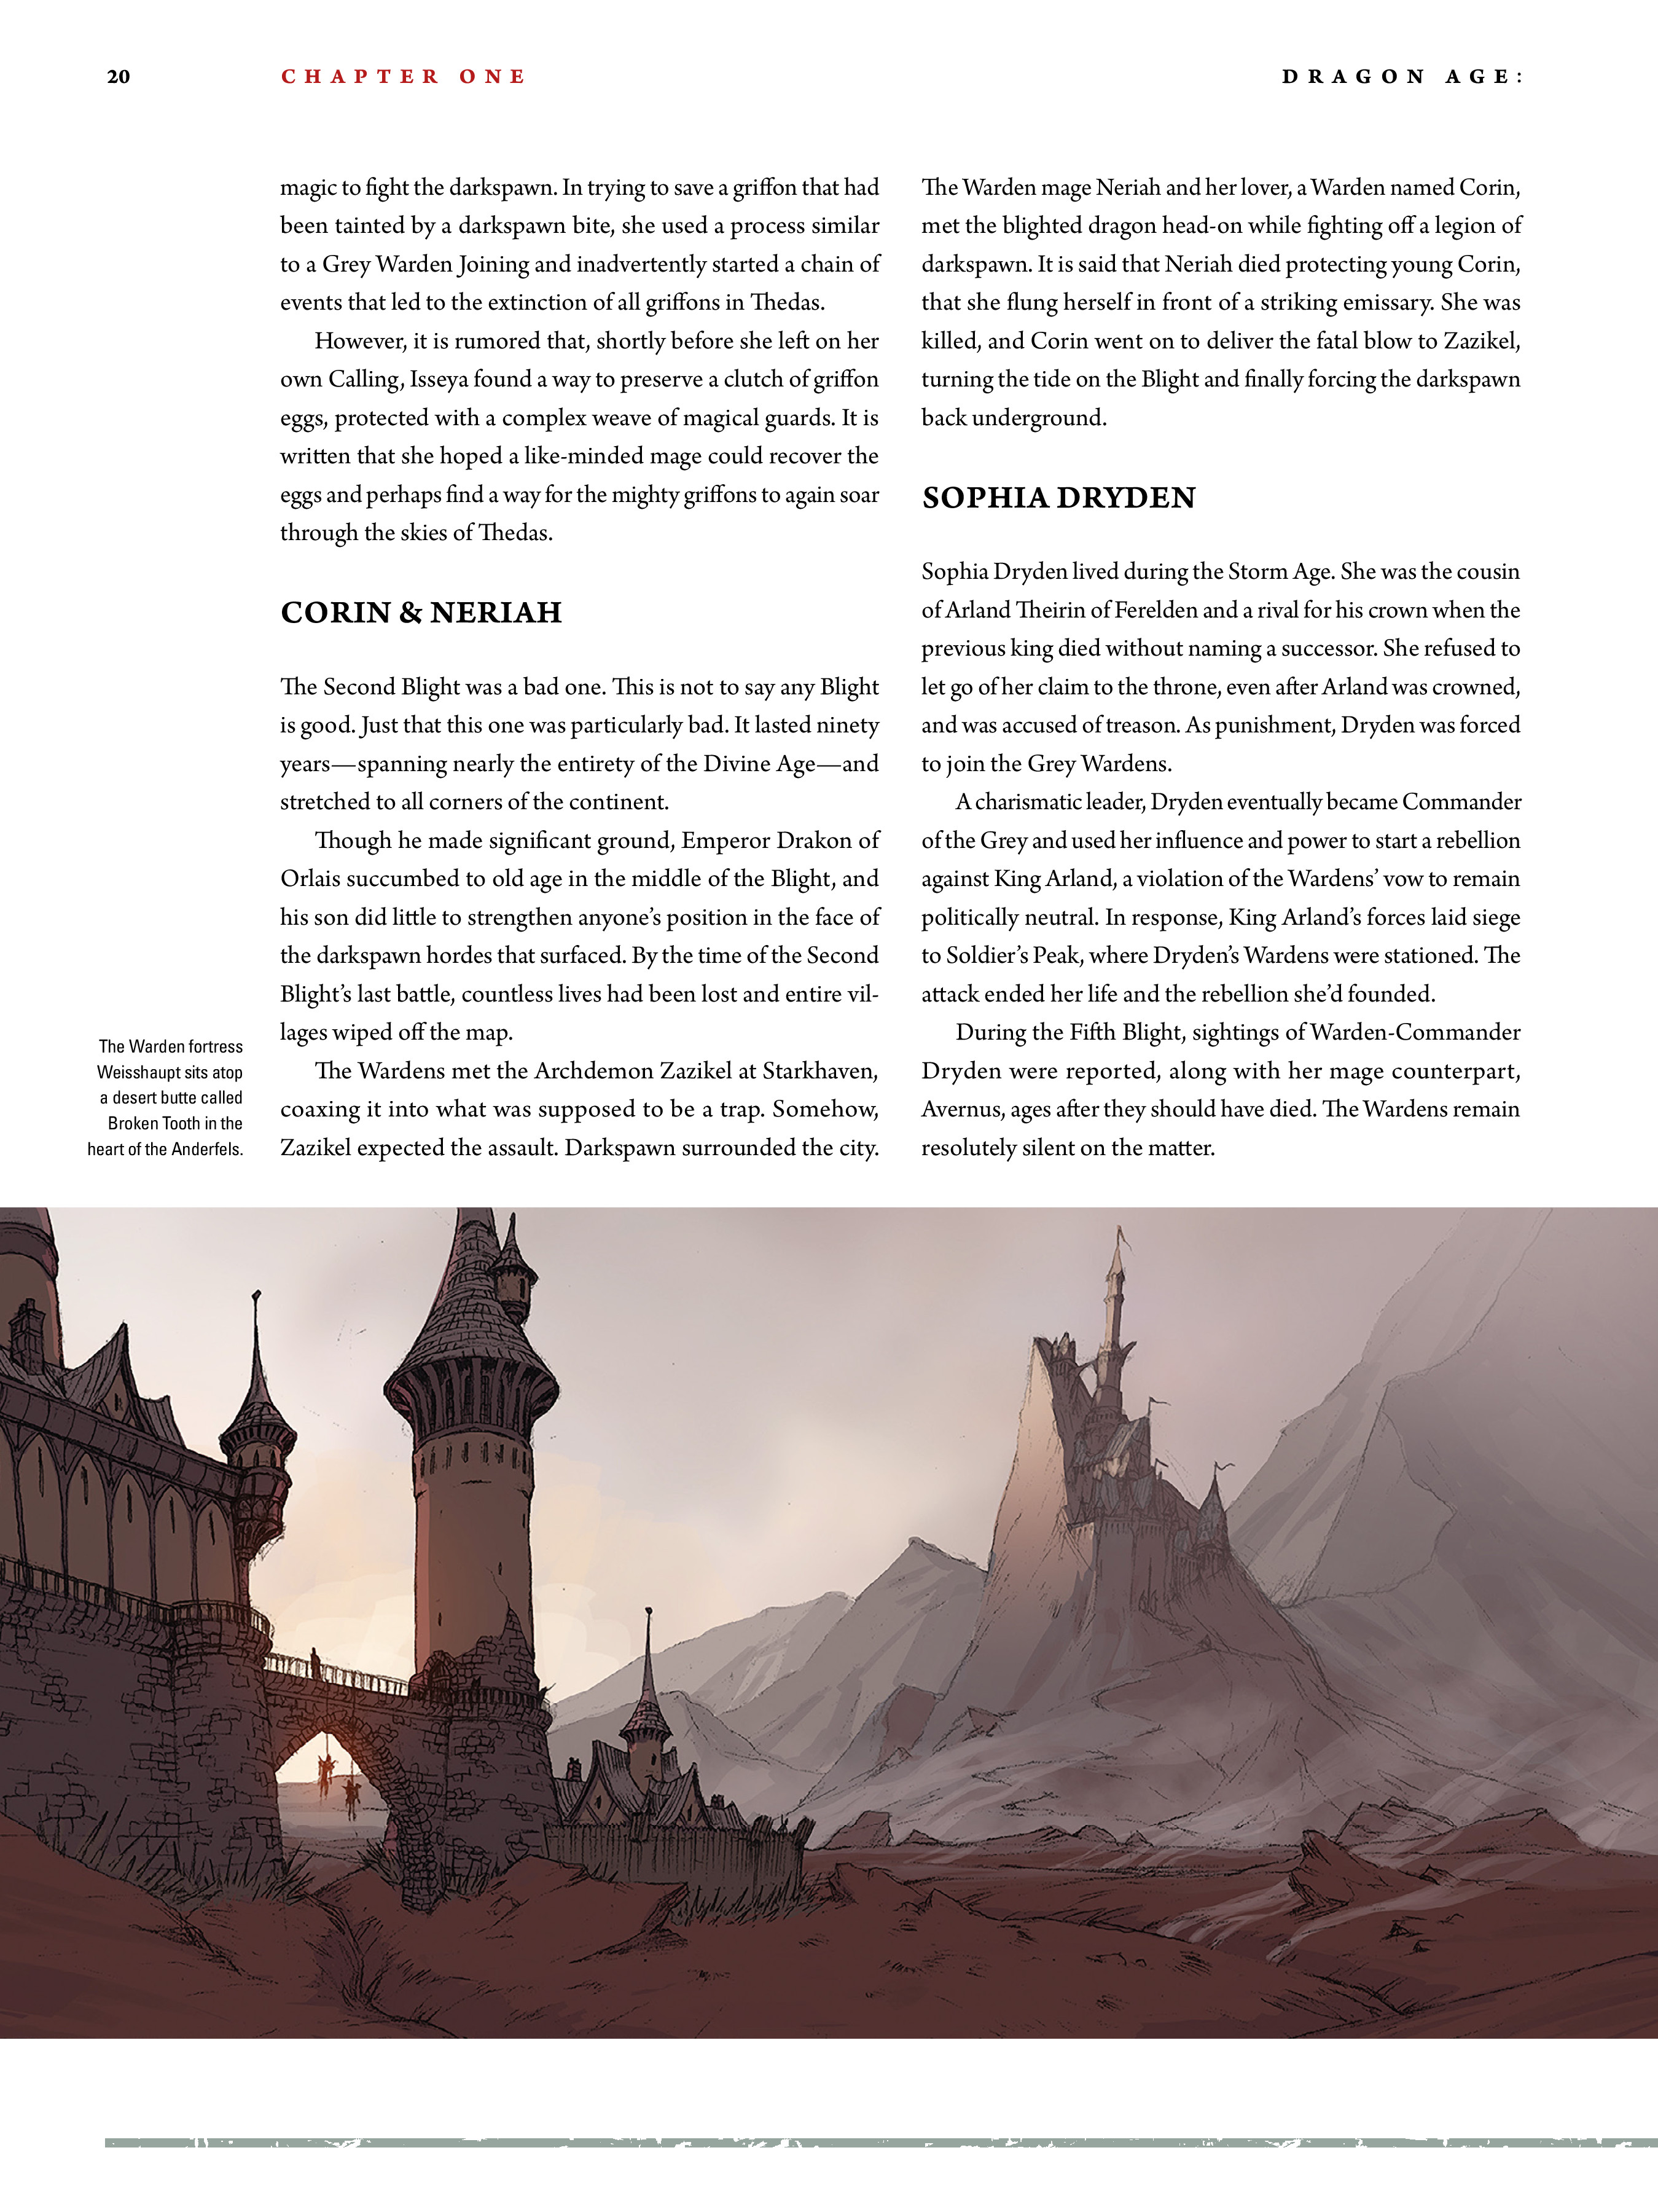 Read online Dragon Age: The World of Thedas comic -  Issue # TPB 2 - 18